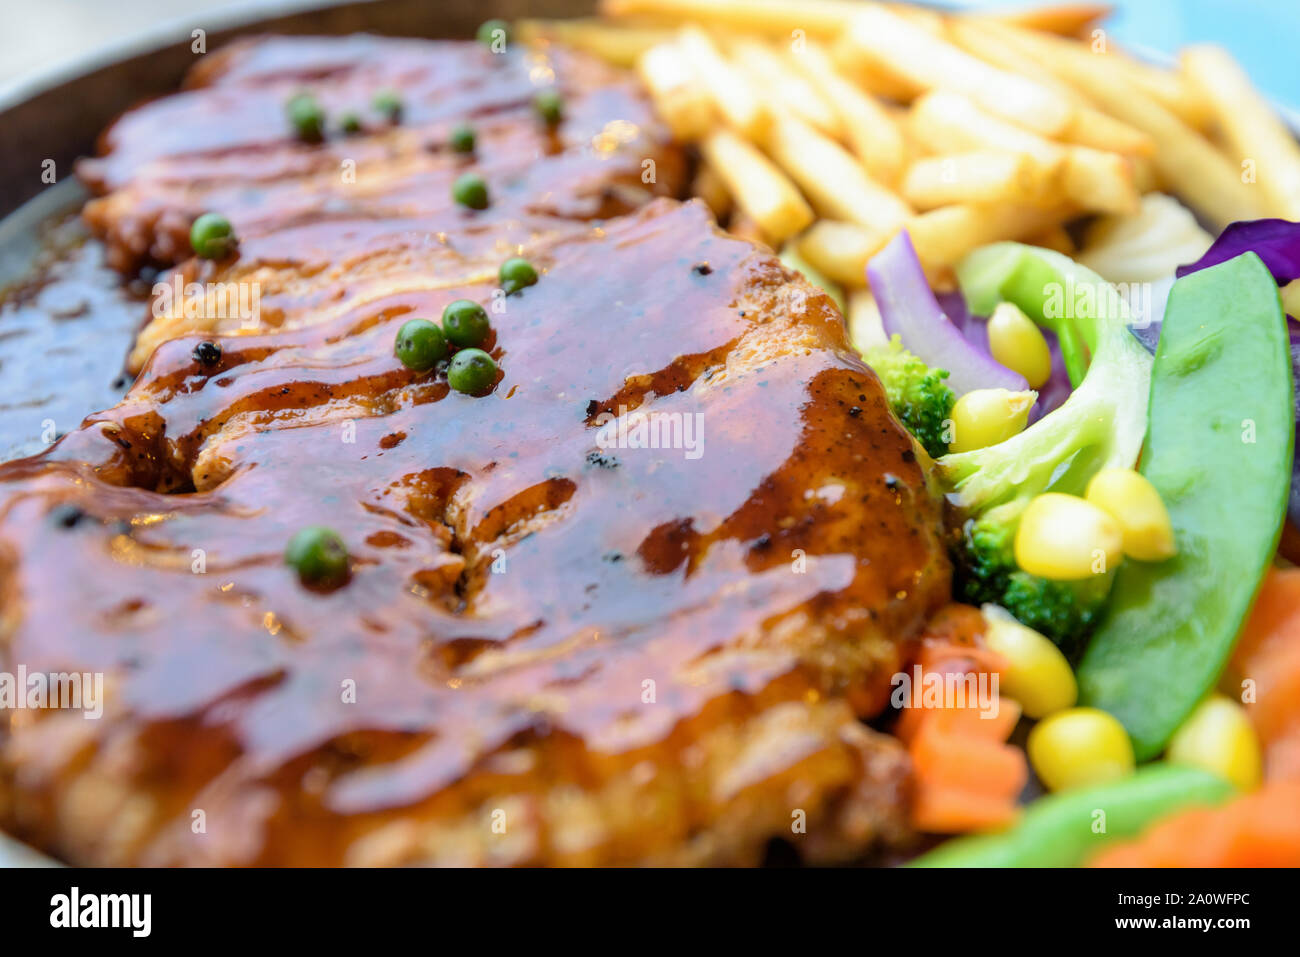 Close up of food made from grill meat, Beef steak topped with black pepper sauce on a hot plate, Dinner with vegetable salad and french fries Stock Photo